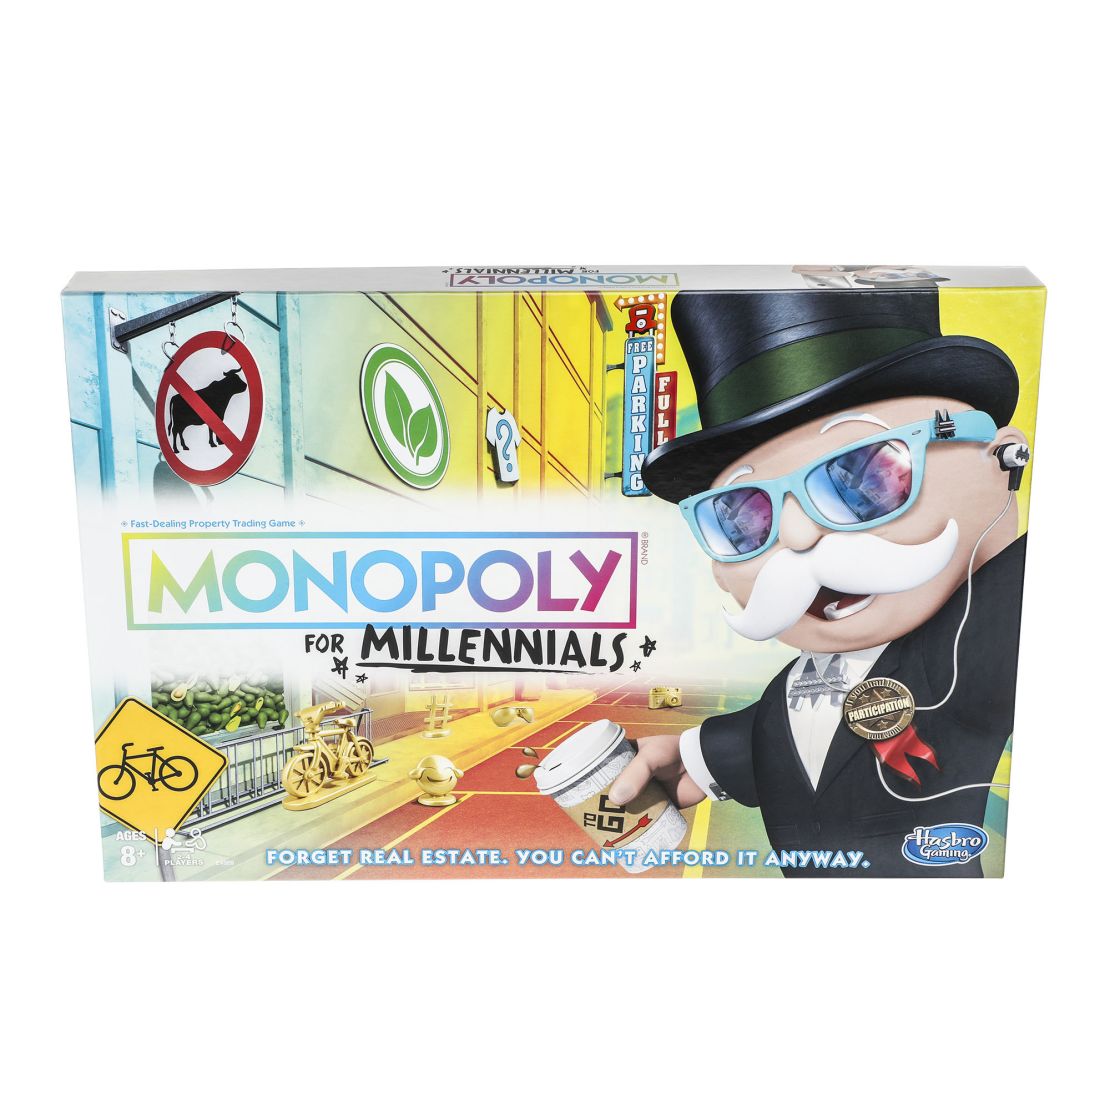 Hasbro in 2018 issued a cheeky Millennials edition of its classic Monopoly board game. Its game tokens included emojis and a hashtag.